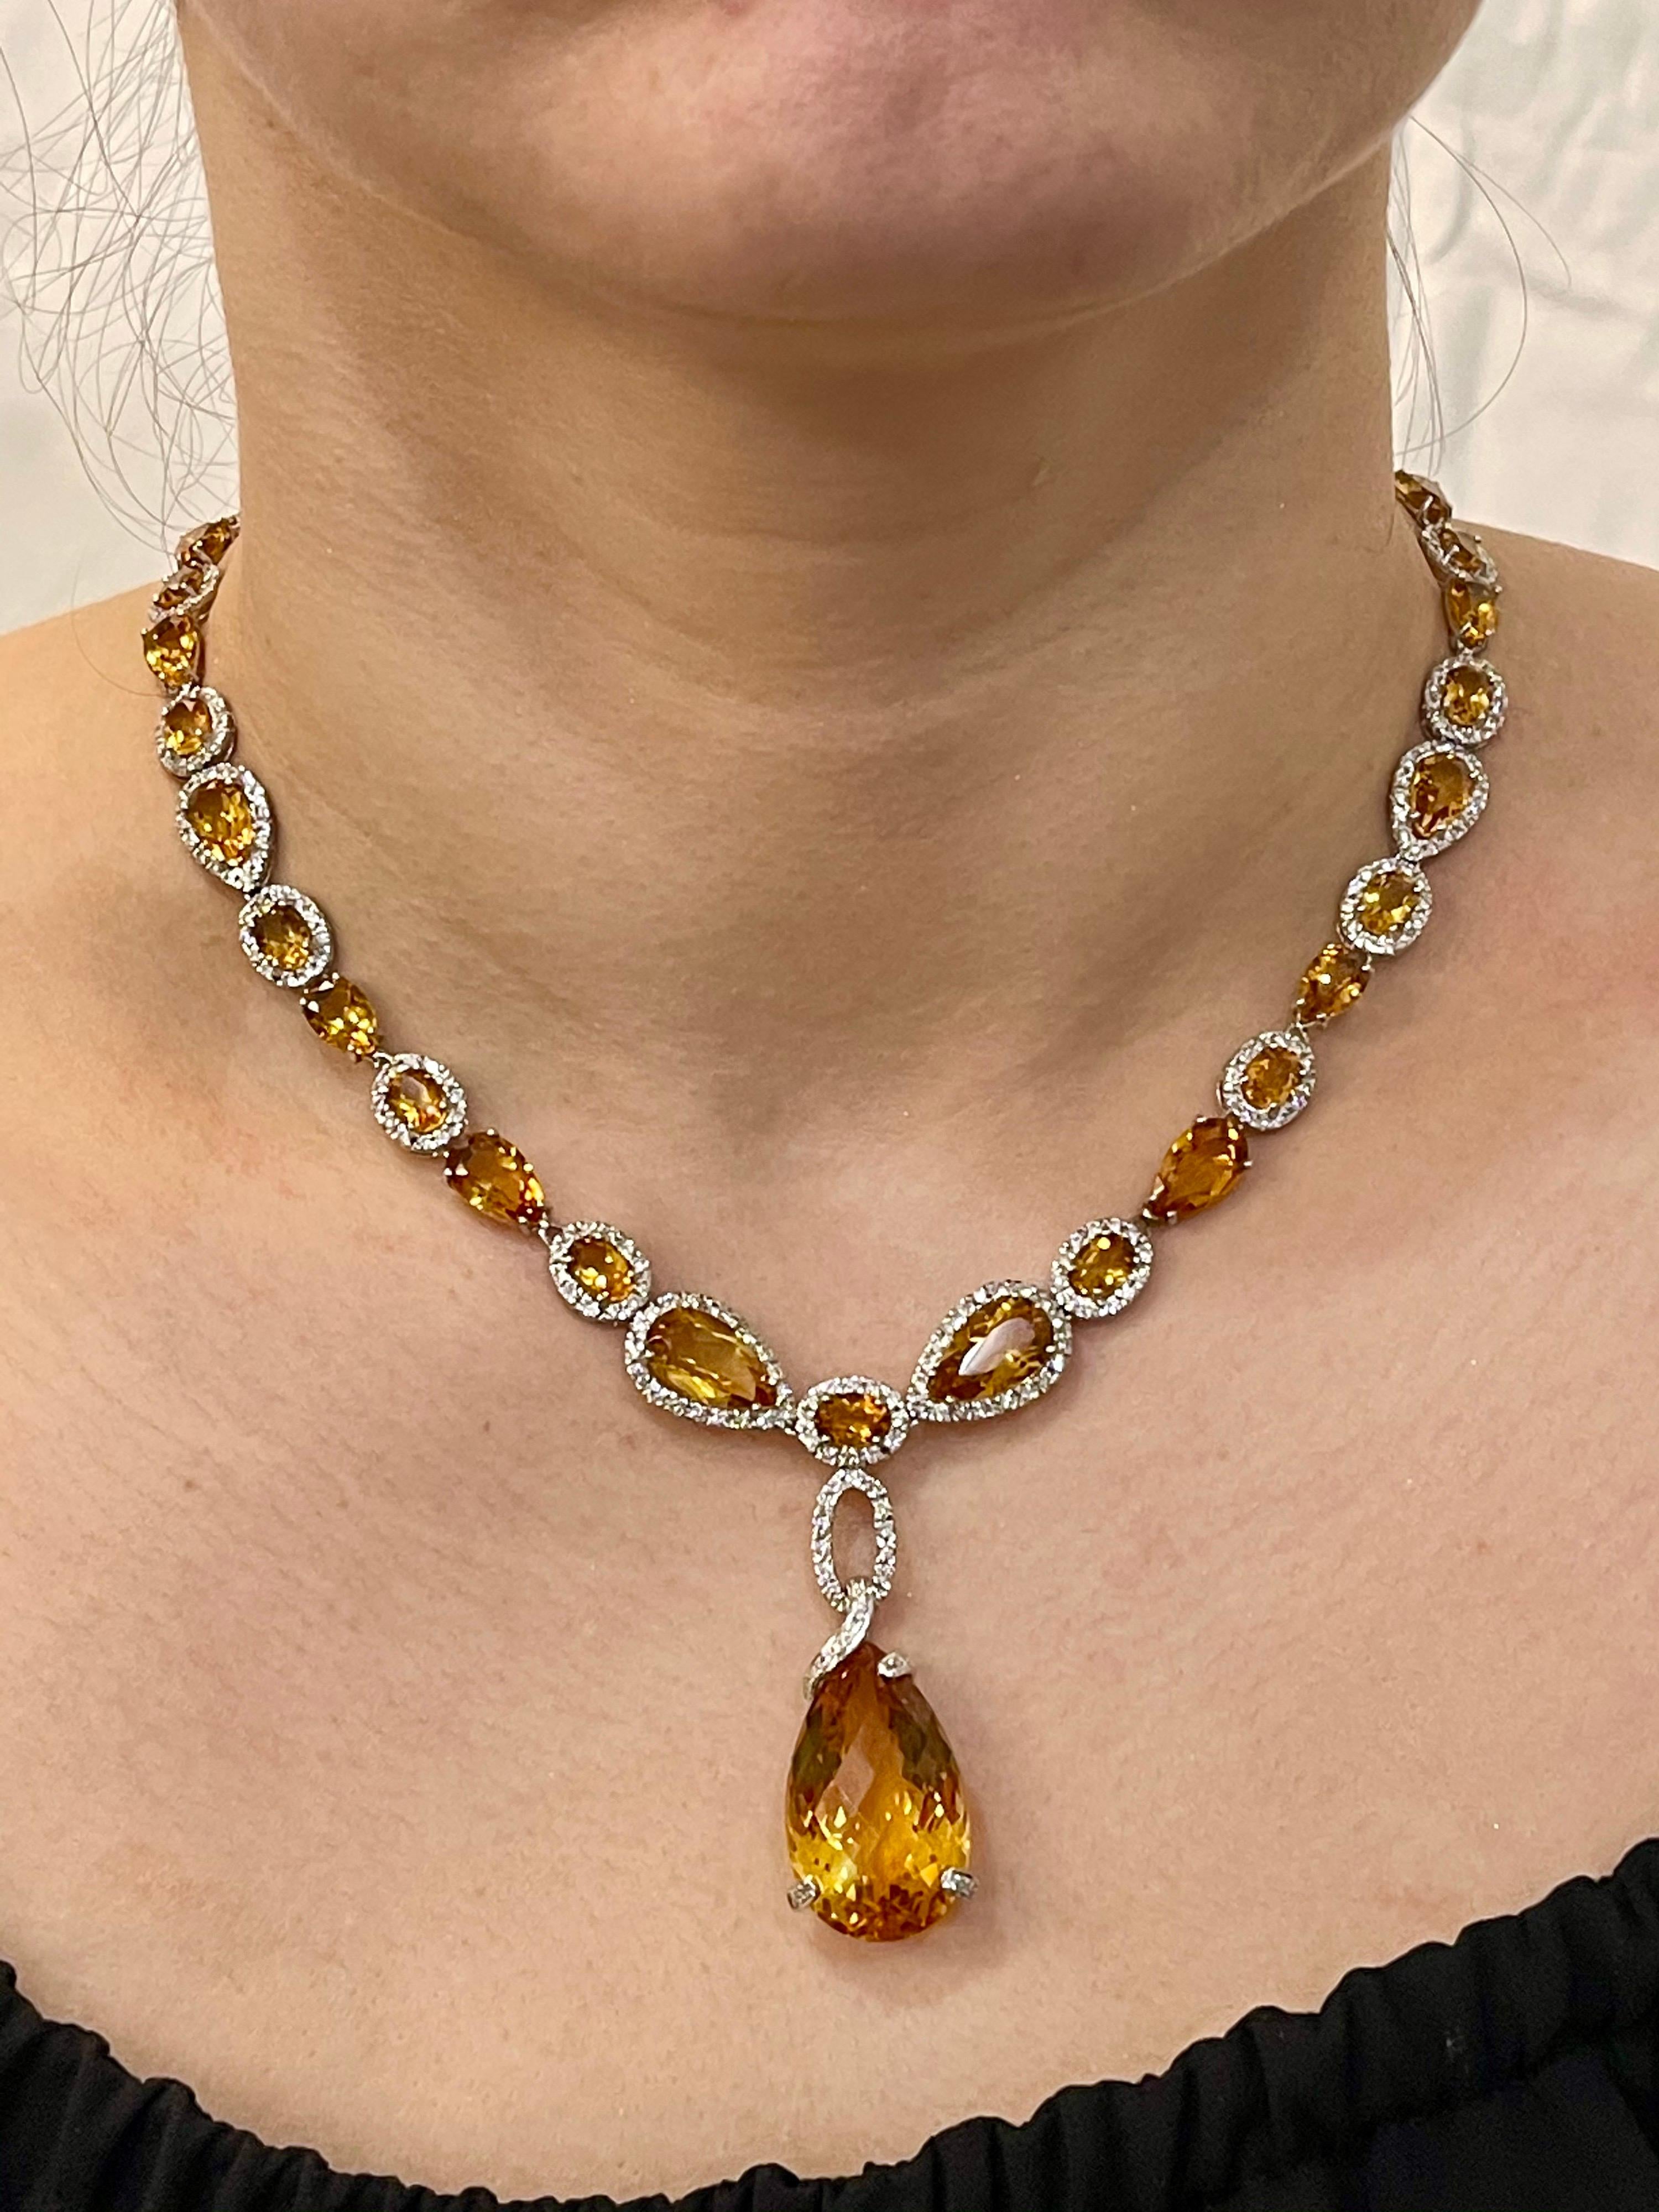 70 Carat Oval and Pear Citrine and 10 Carat Diamonds Necklace 18 Karat Gold For Sale 6